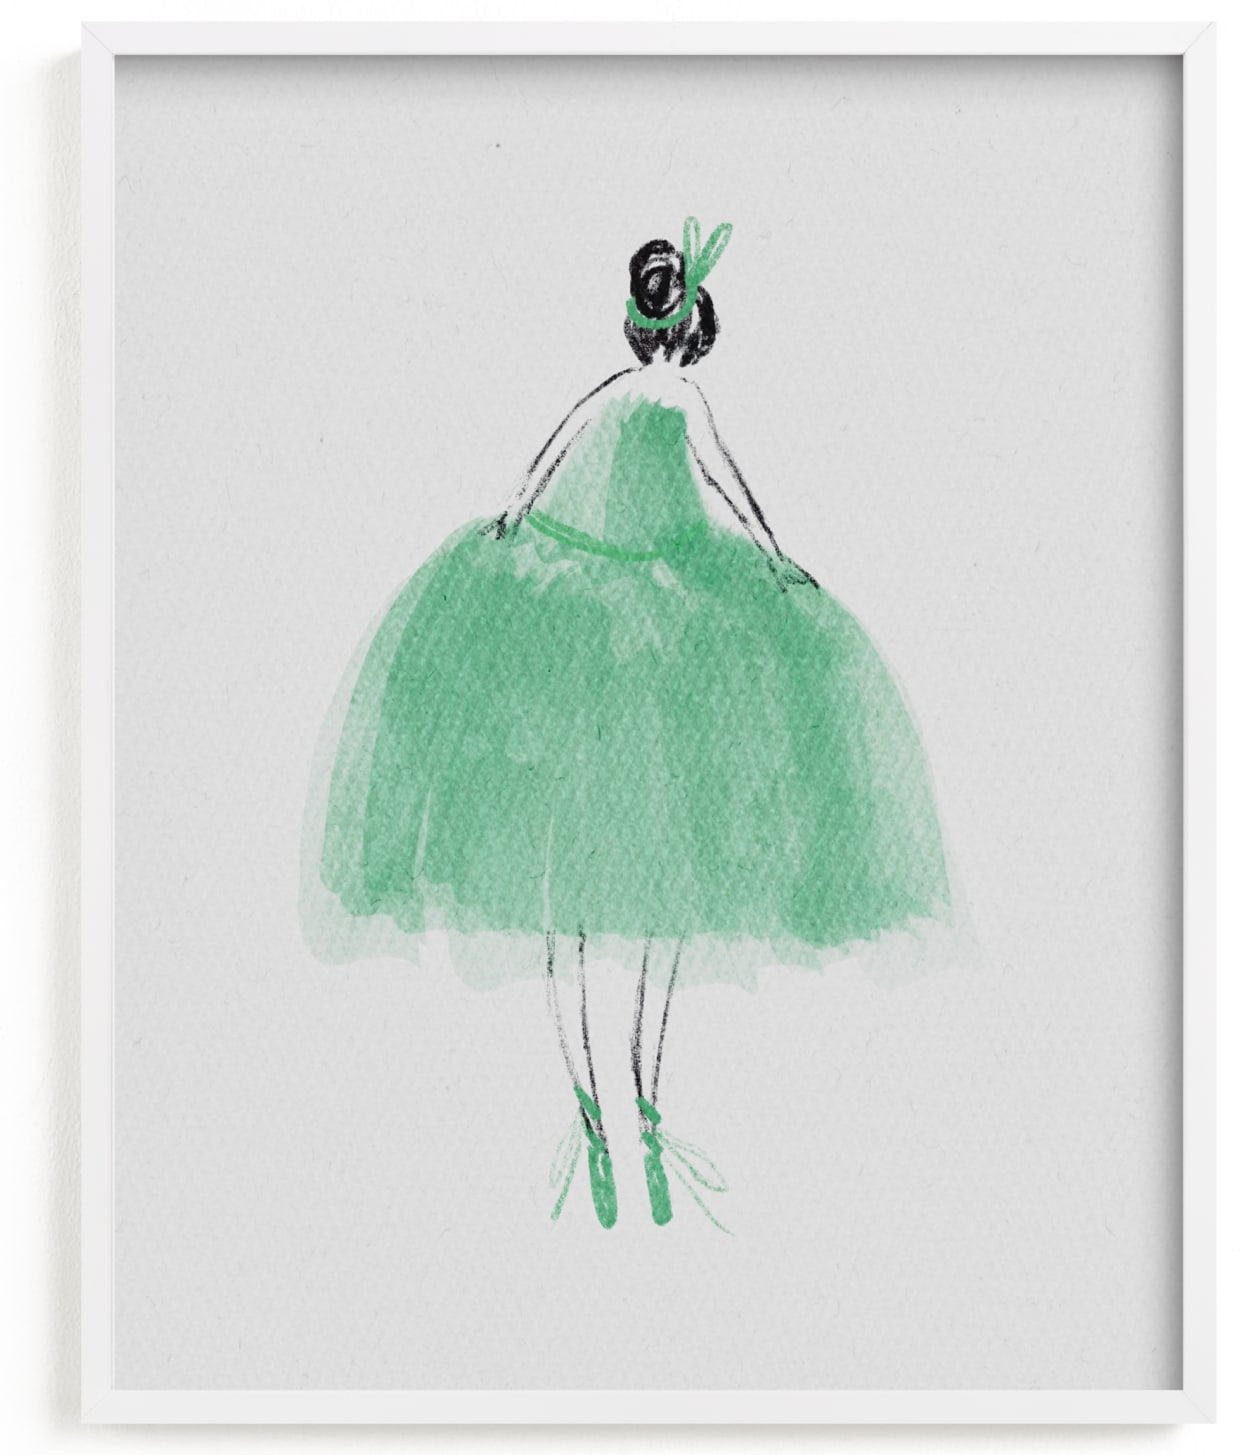 This is a green kids wall art by Grae called Painted Ballerina.